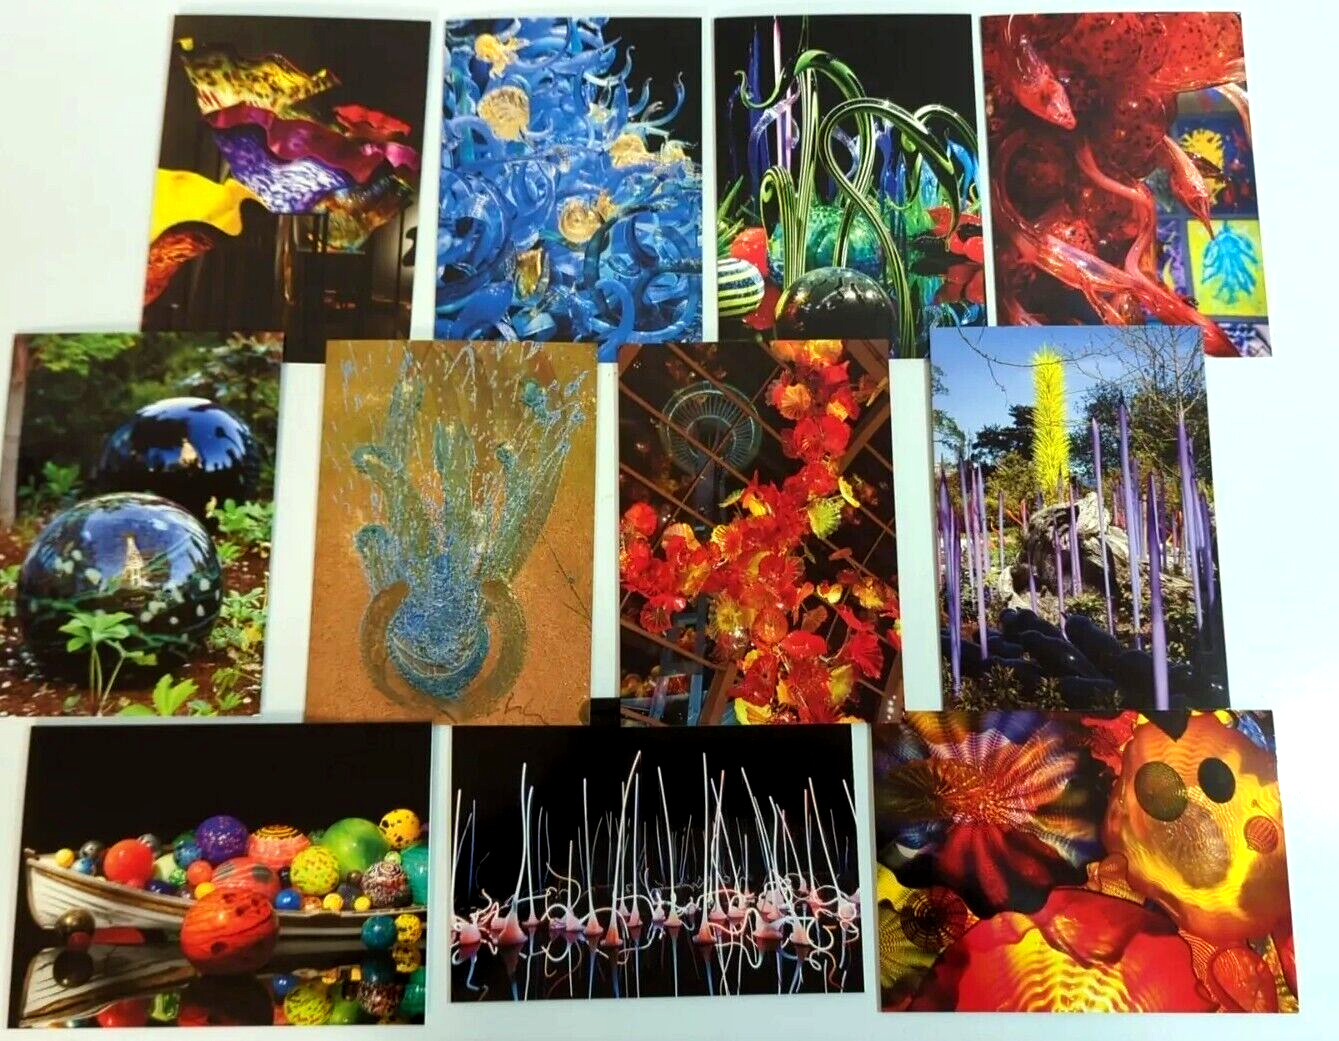 Lot 11 Dale Chihuly Glass Sculpture Notecards Envelopes  Postcards 2013 Seattle